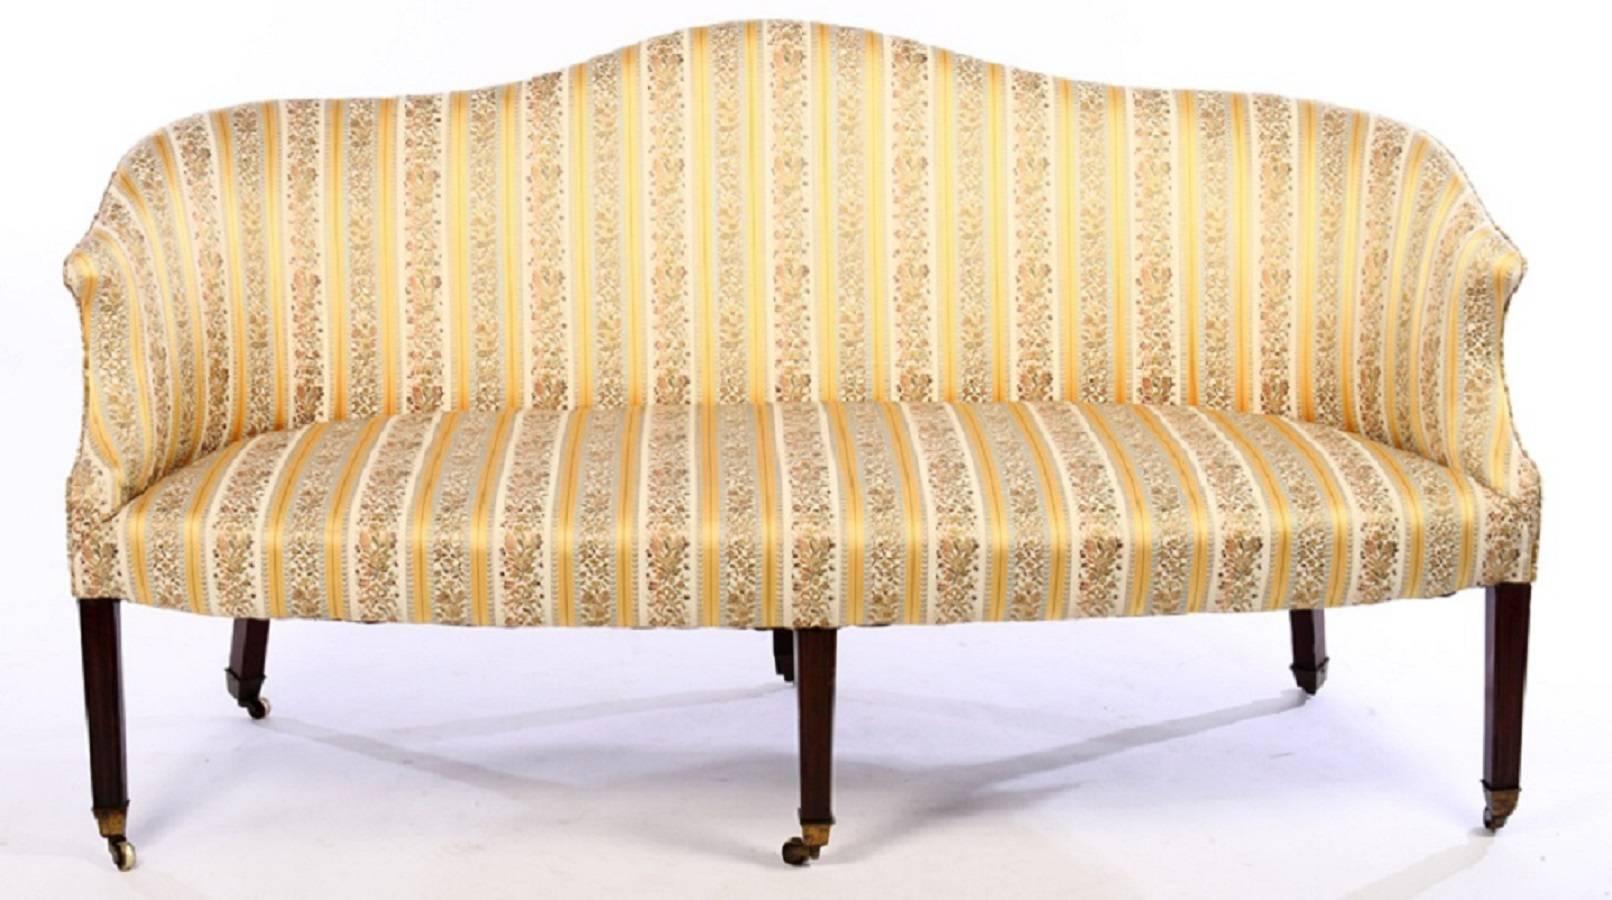 Hepplewhite design. Handsome and graceful sofa with mahogany moulded legs and original castors. Upholstery in great condition, ready for new fabric if desired.